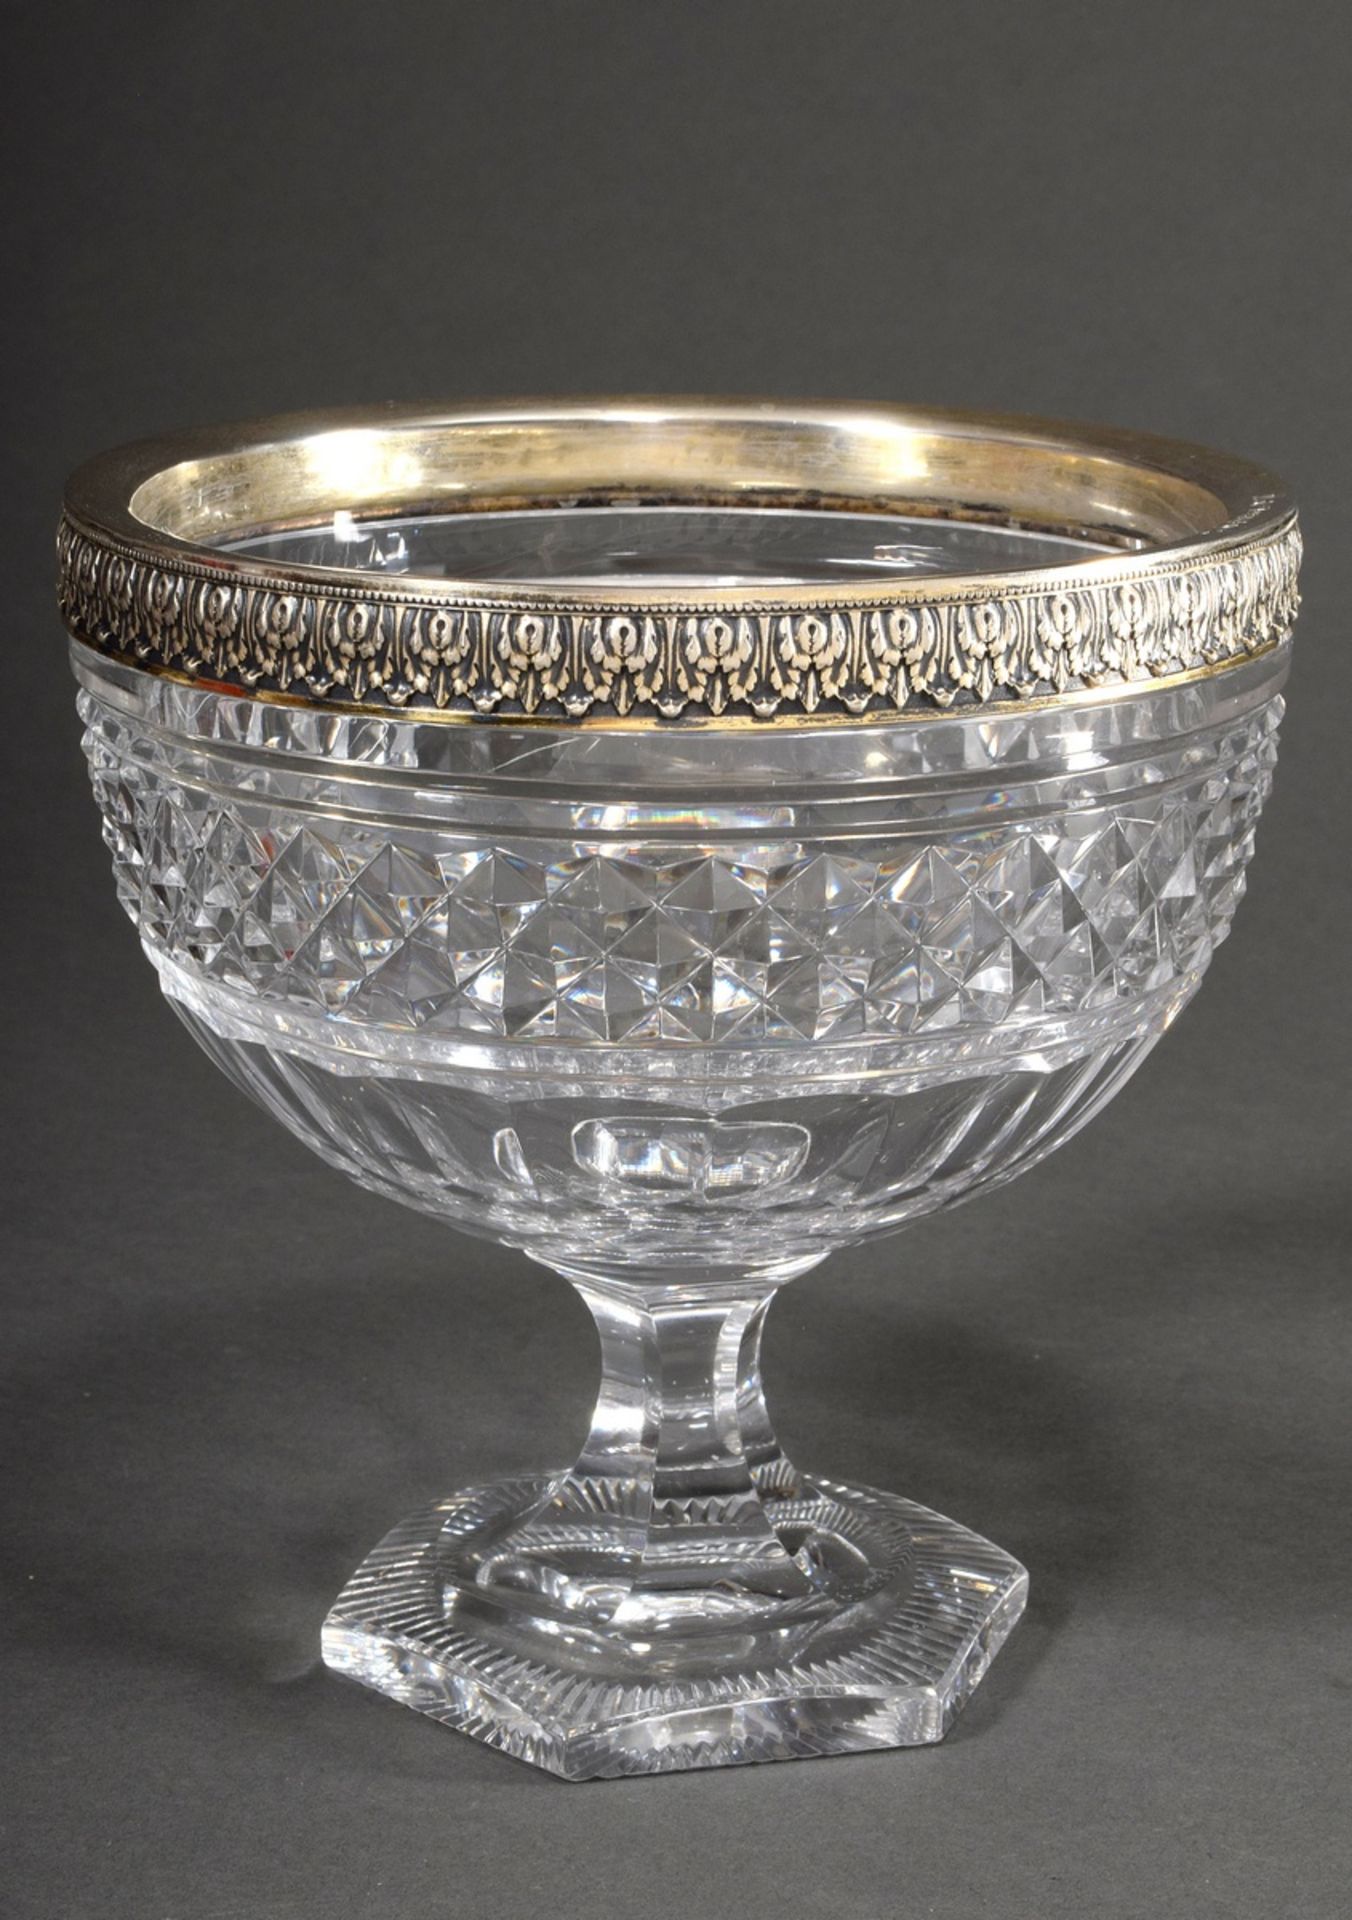 Cut crystal top bowl with gilded silver 800 leaf frieze rim and date engraving, Adolf Mogler/Heilbr - Image 2 of 4